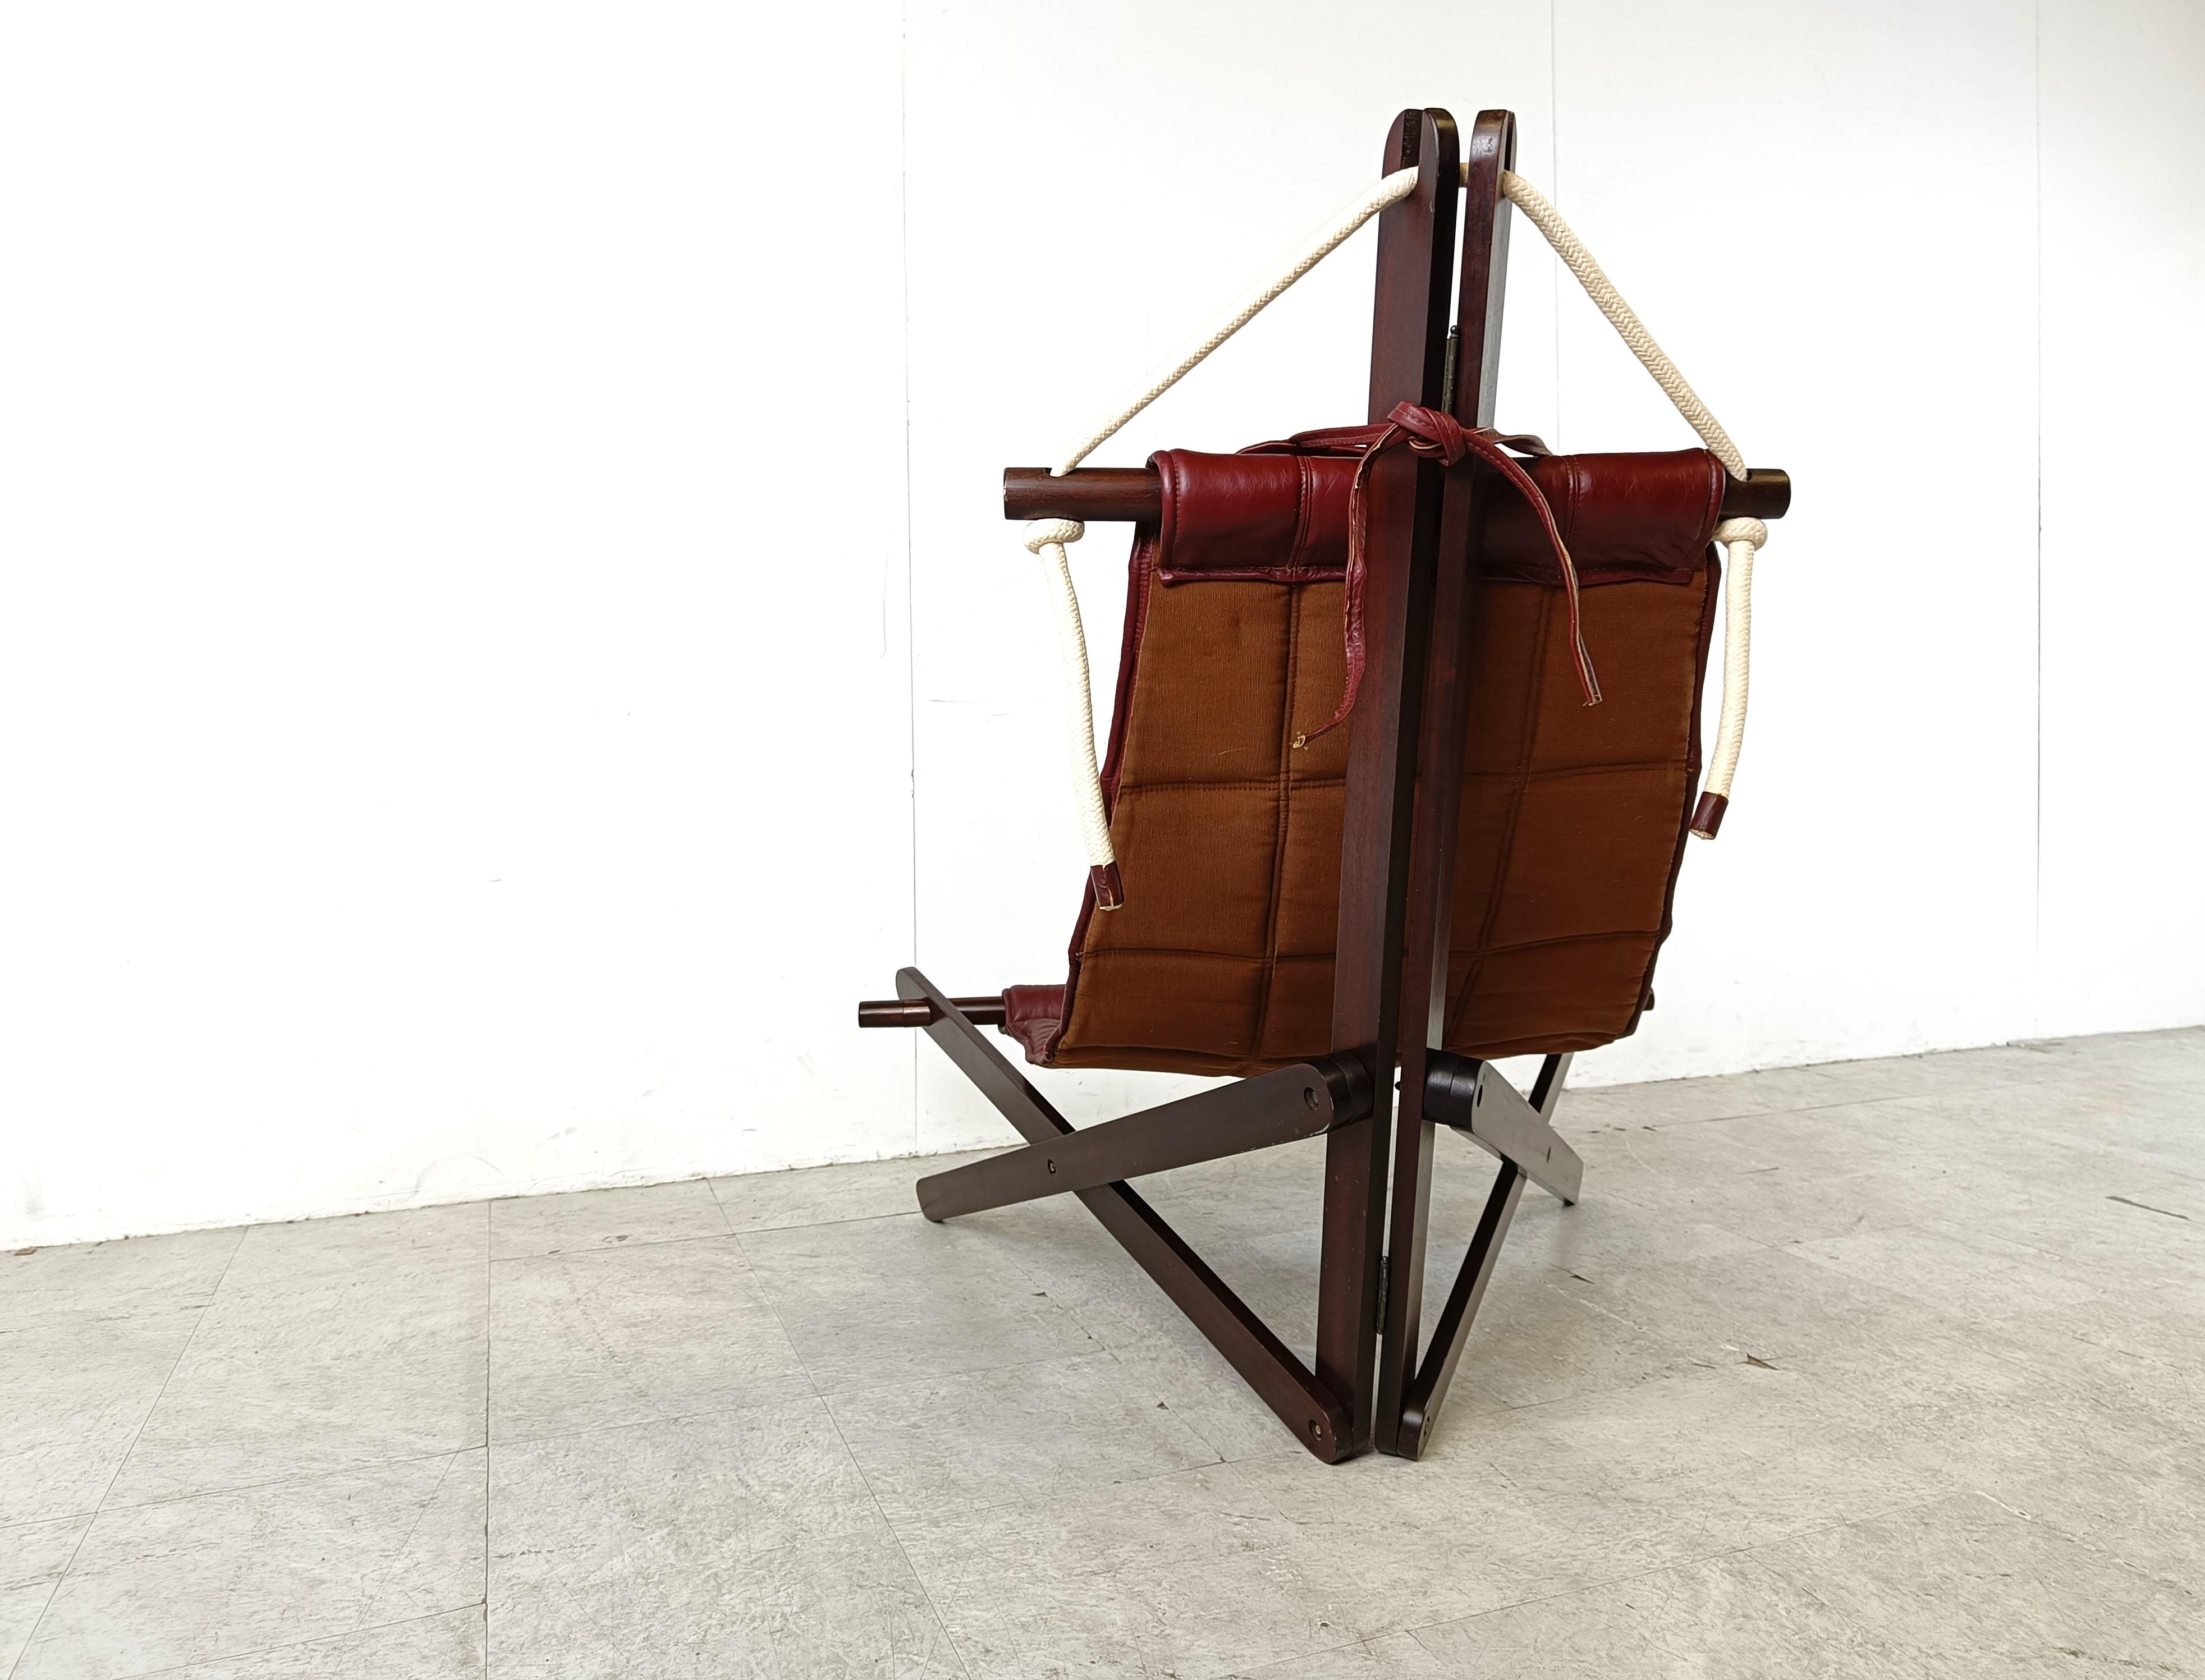 Collectible lounge chair designed by Dominic Michaelis for Moveis Corazza consisting of a sculptural wooden frame with a red leather sling leather seat attached with cords.

The maritime inspired design represents a Sail with frame and is cleverly